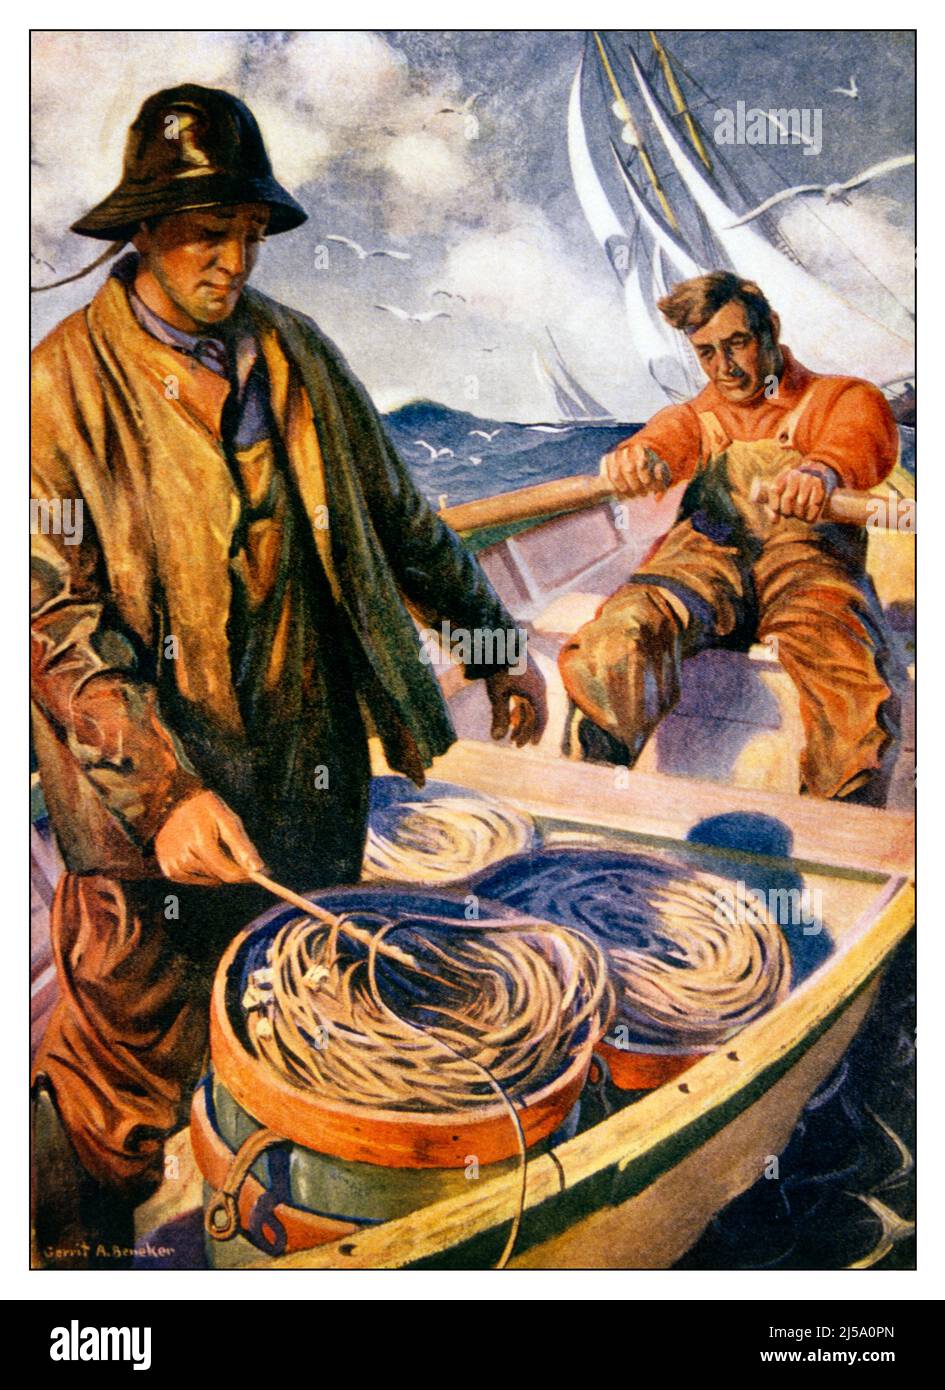 Commercial fishing clothing Cut Out Stock Images & Pictures - Alamy